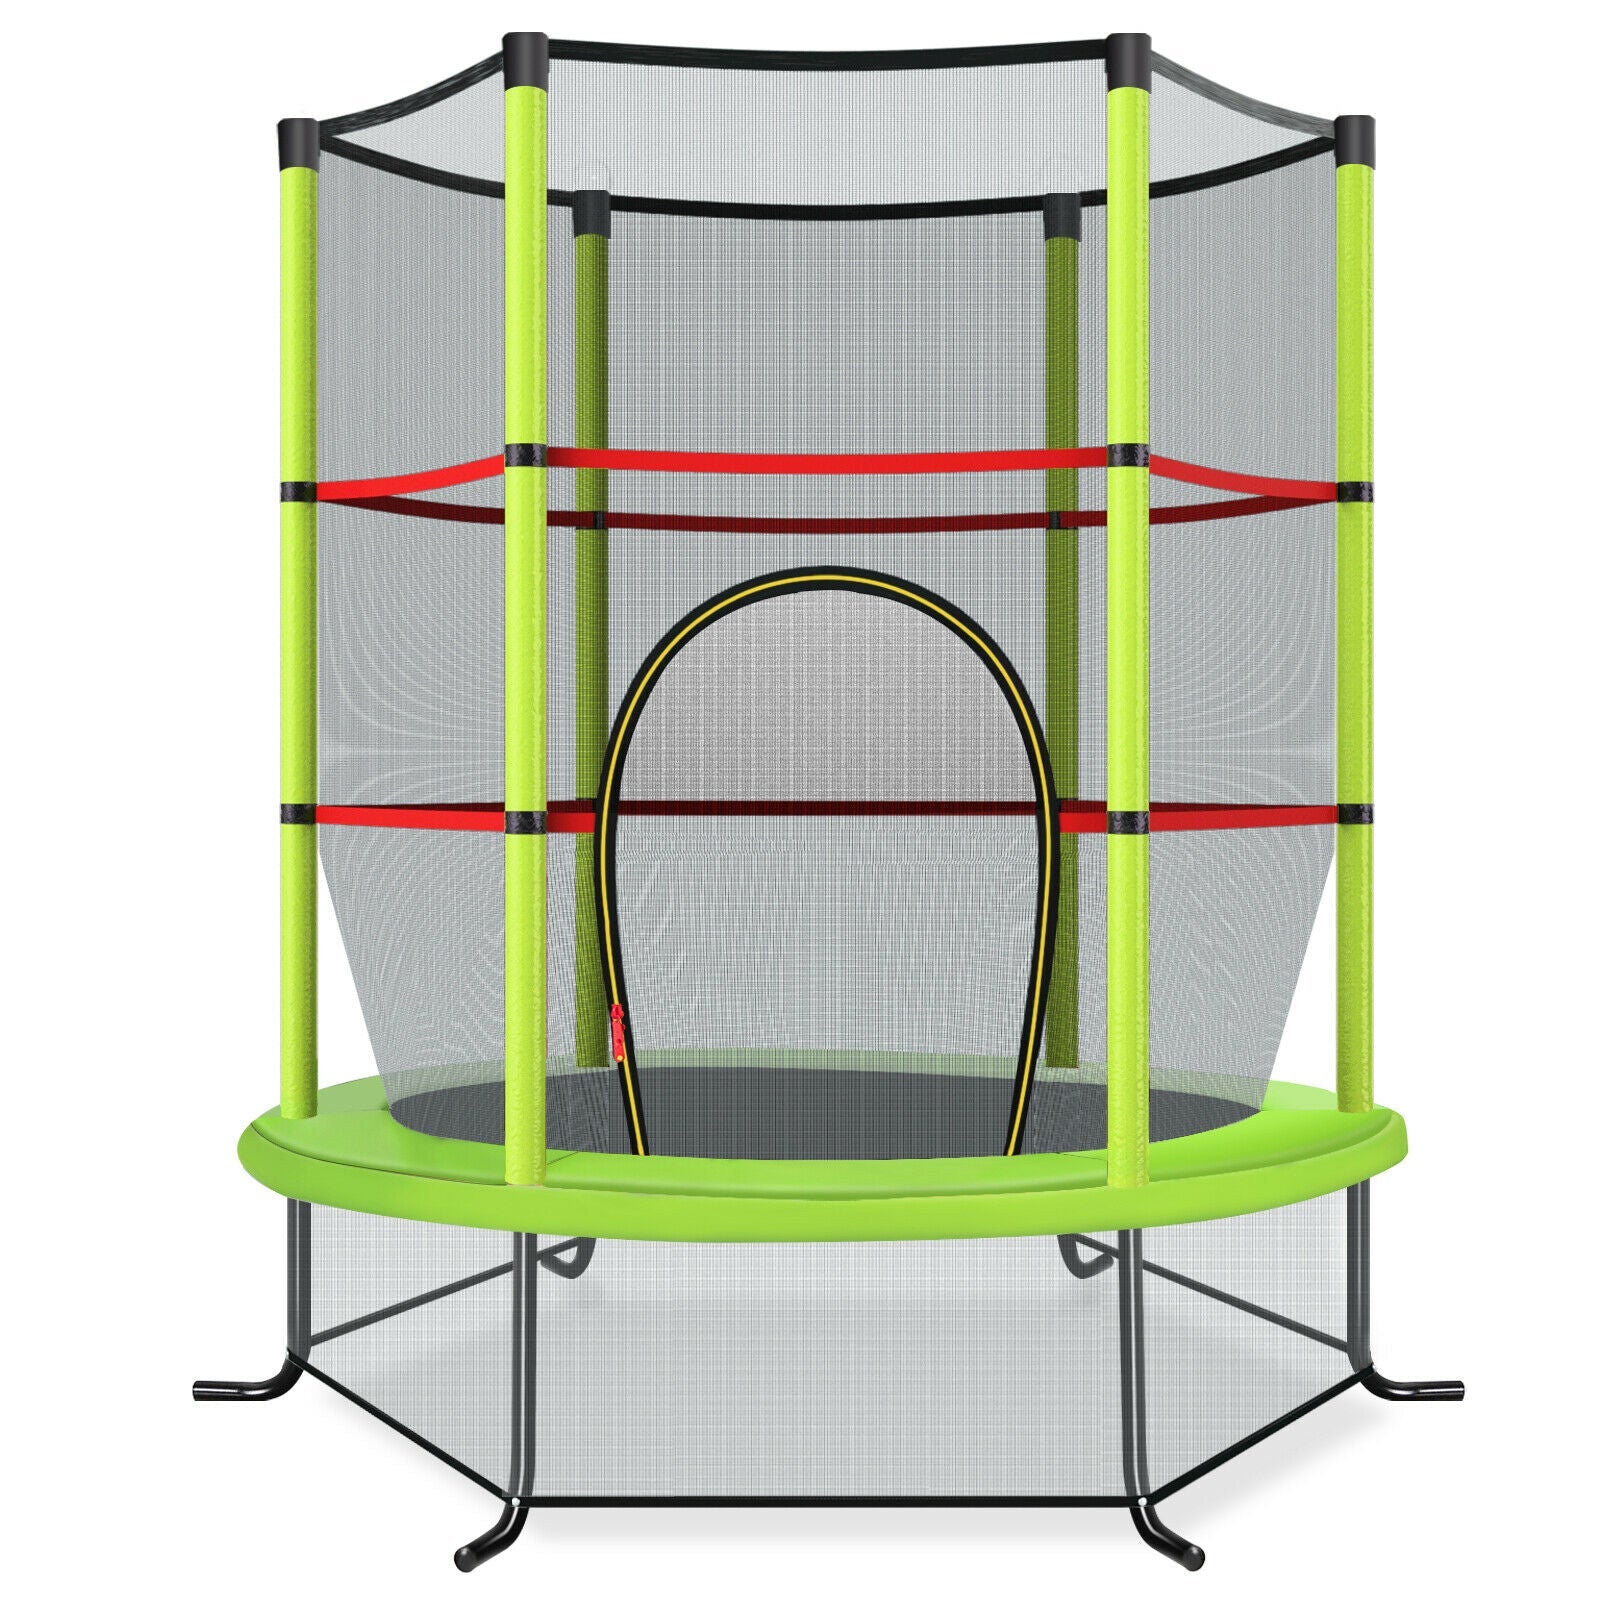 Active Fun: Green Mini Trampoline with Enclosure Net for Kids